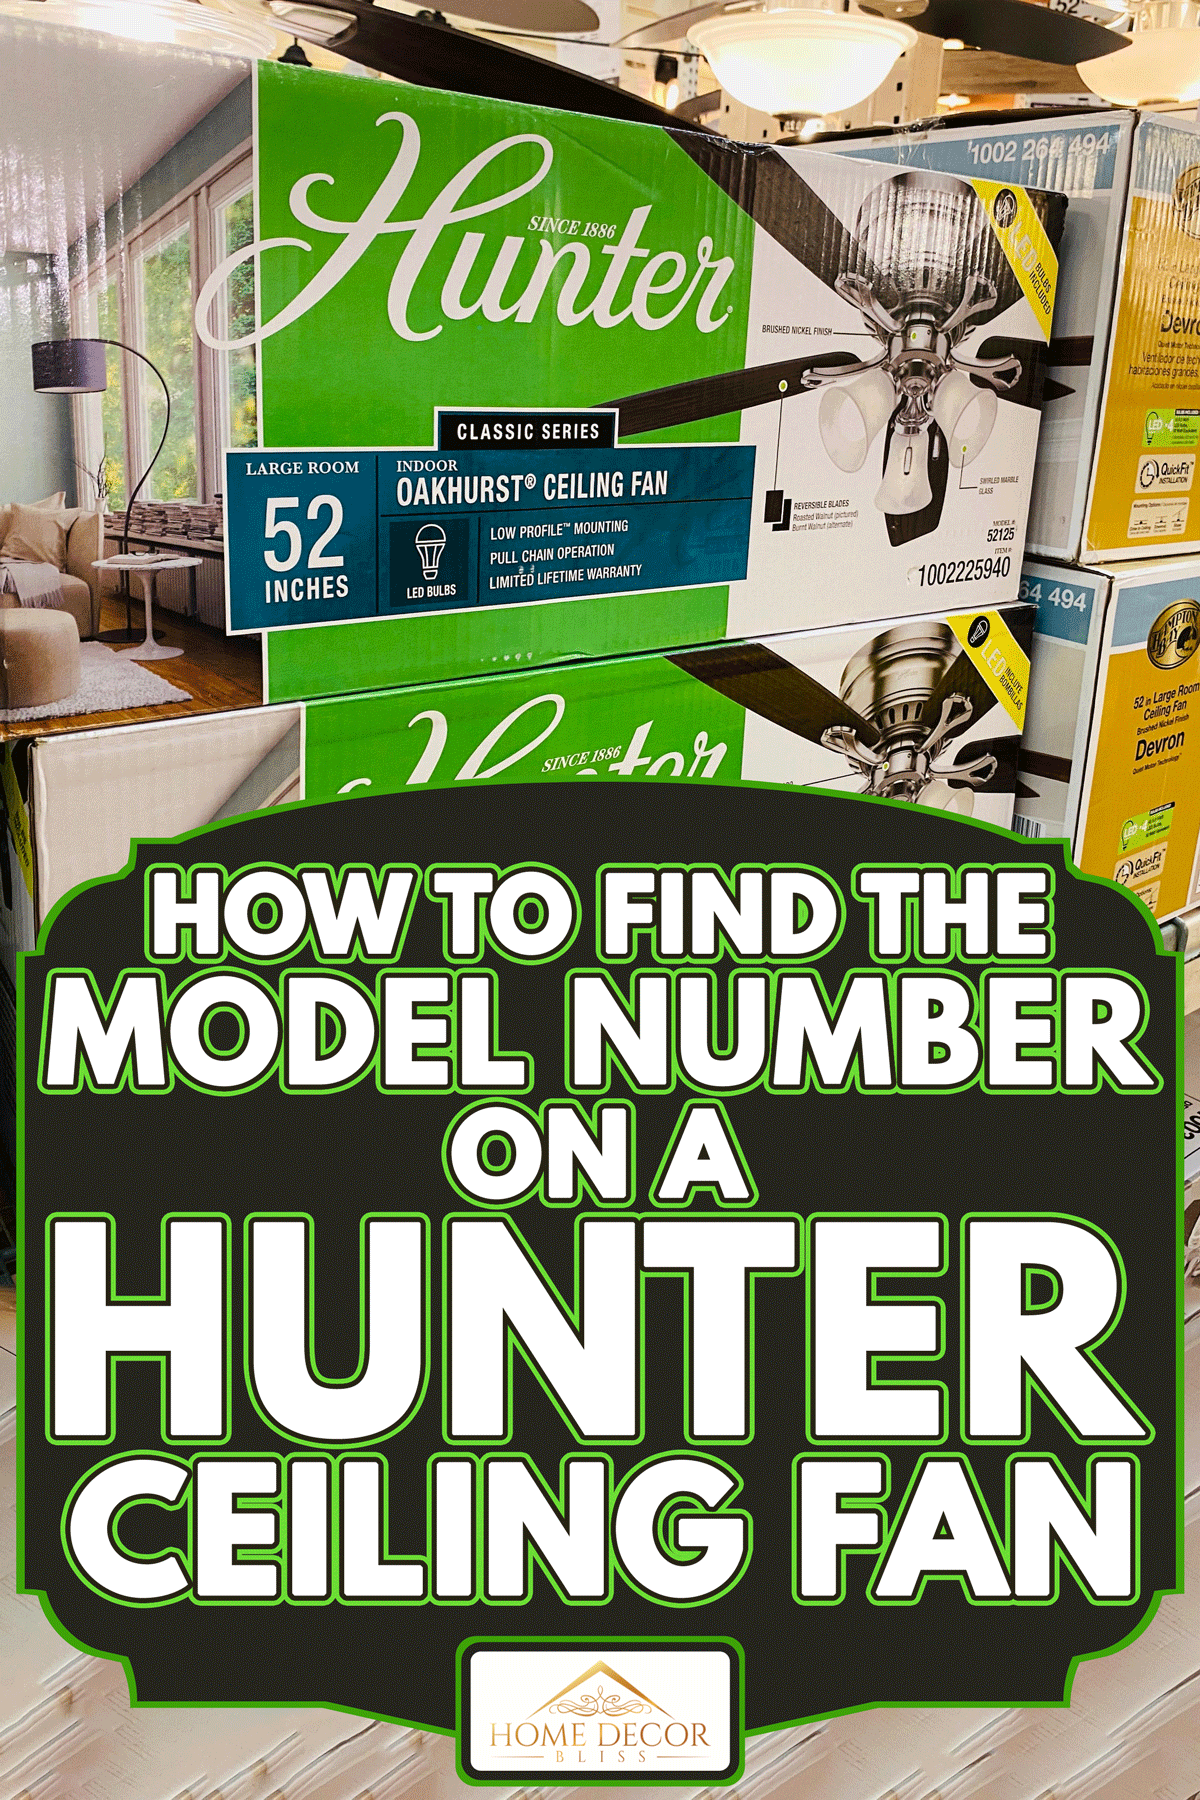 Hunter brand of ceiling fans in boxes on shelf, How To Find The Model Number On A Hunter Ceiling Fan